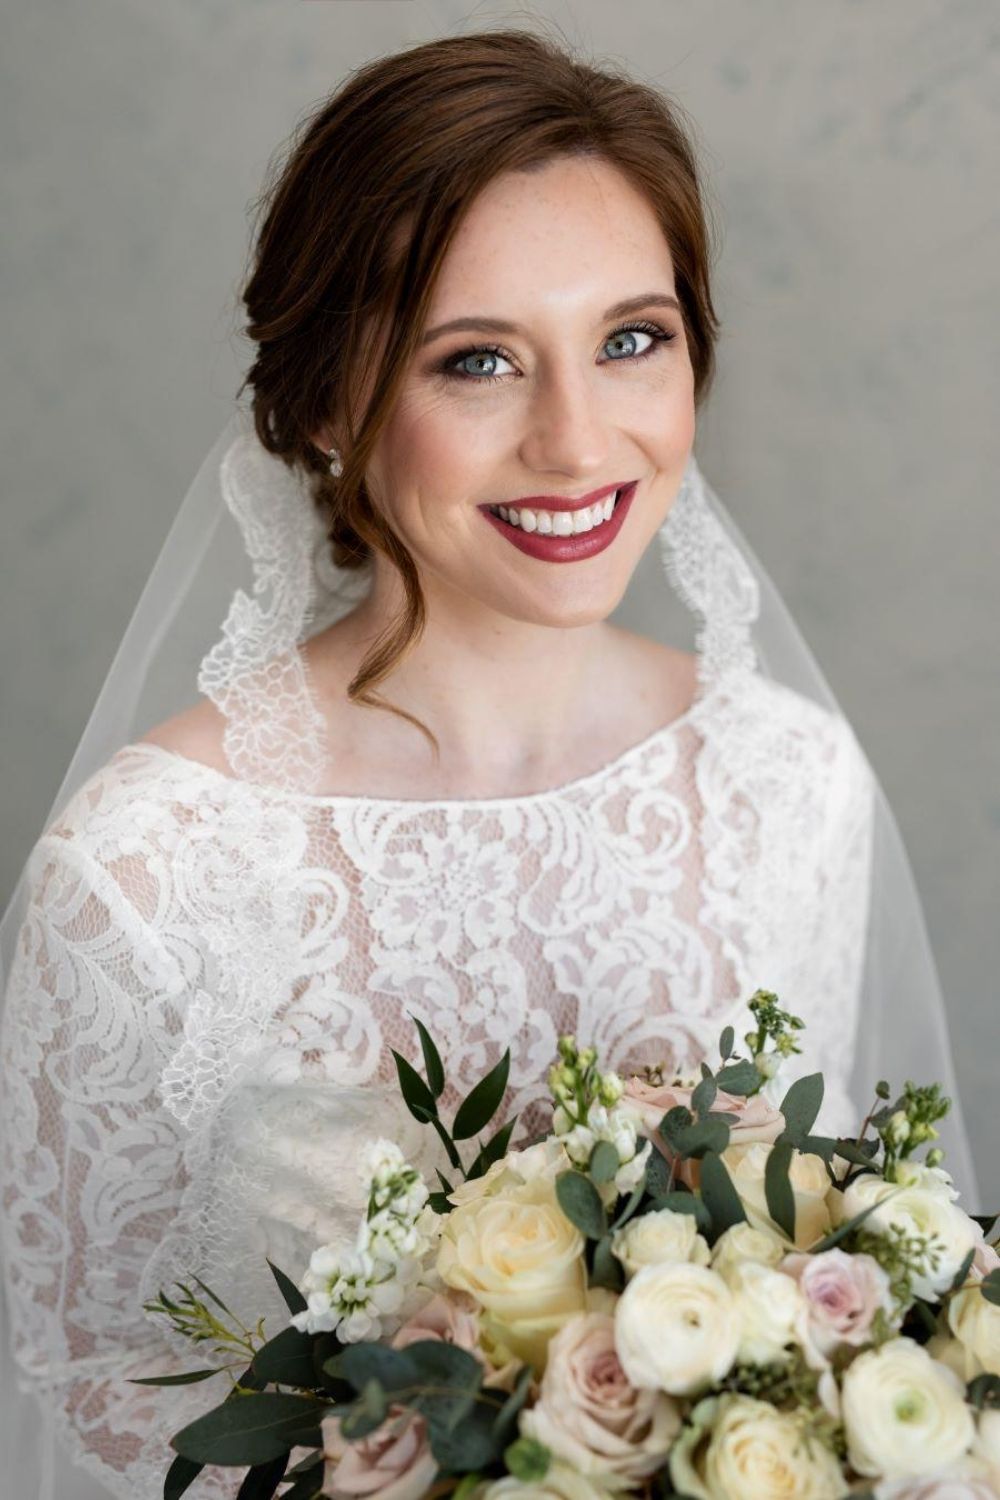 Bride with hair pinned up hairstyle in glam makeup with red lip color